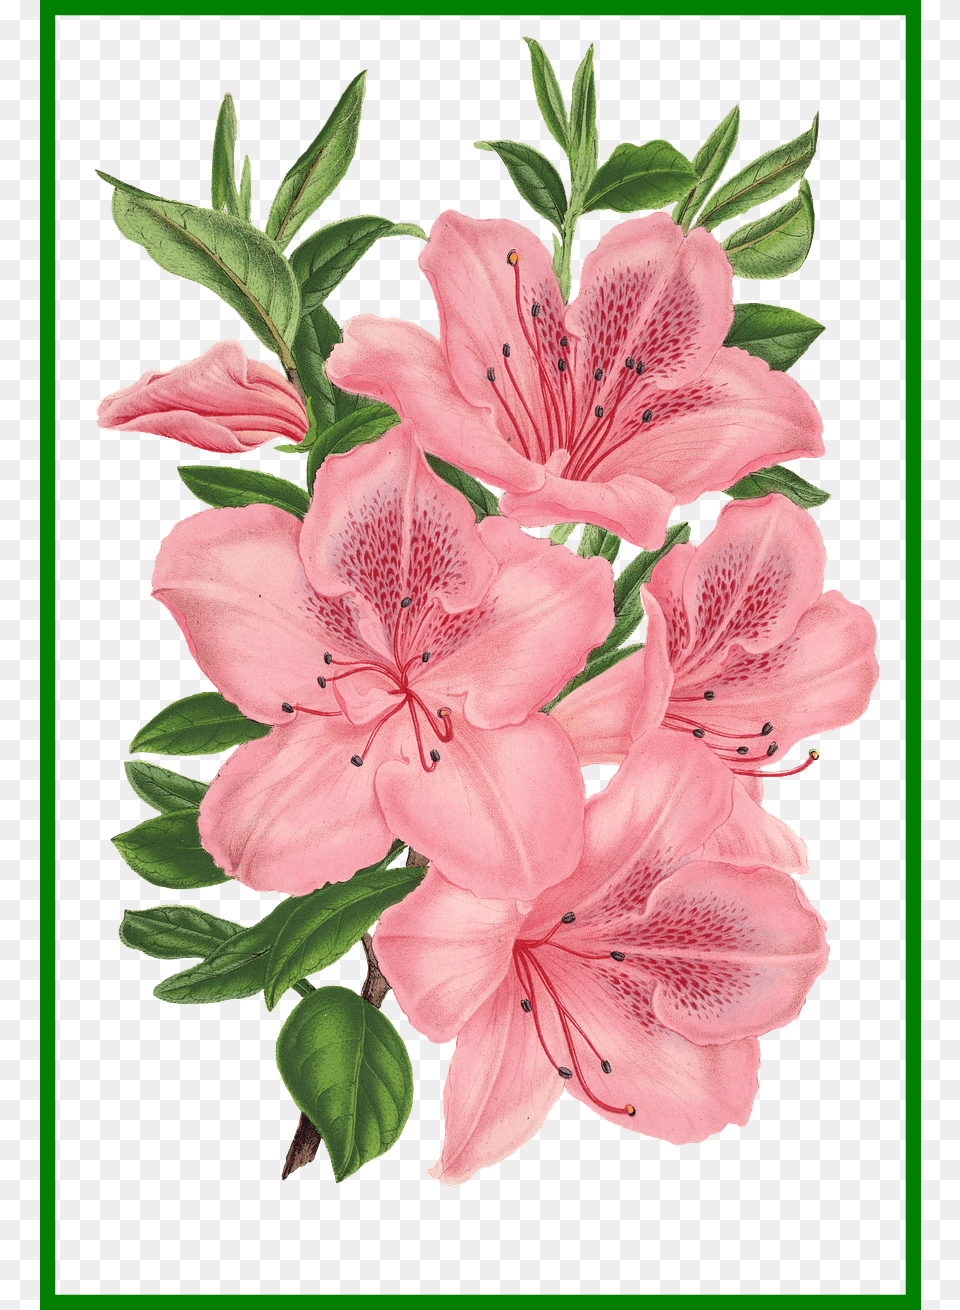 Appealing Pink Bunch Of Flowers Photoshop Drawing Of Pink Flowers, Flower, Plant, Rose, Geranium Free Transparent Png